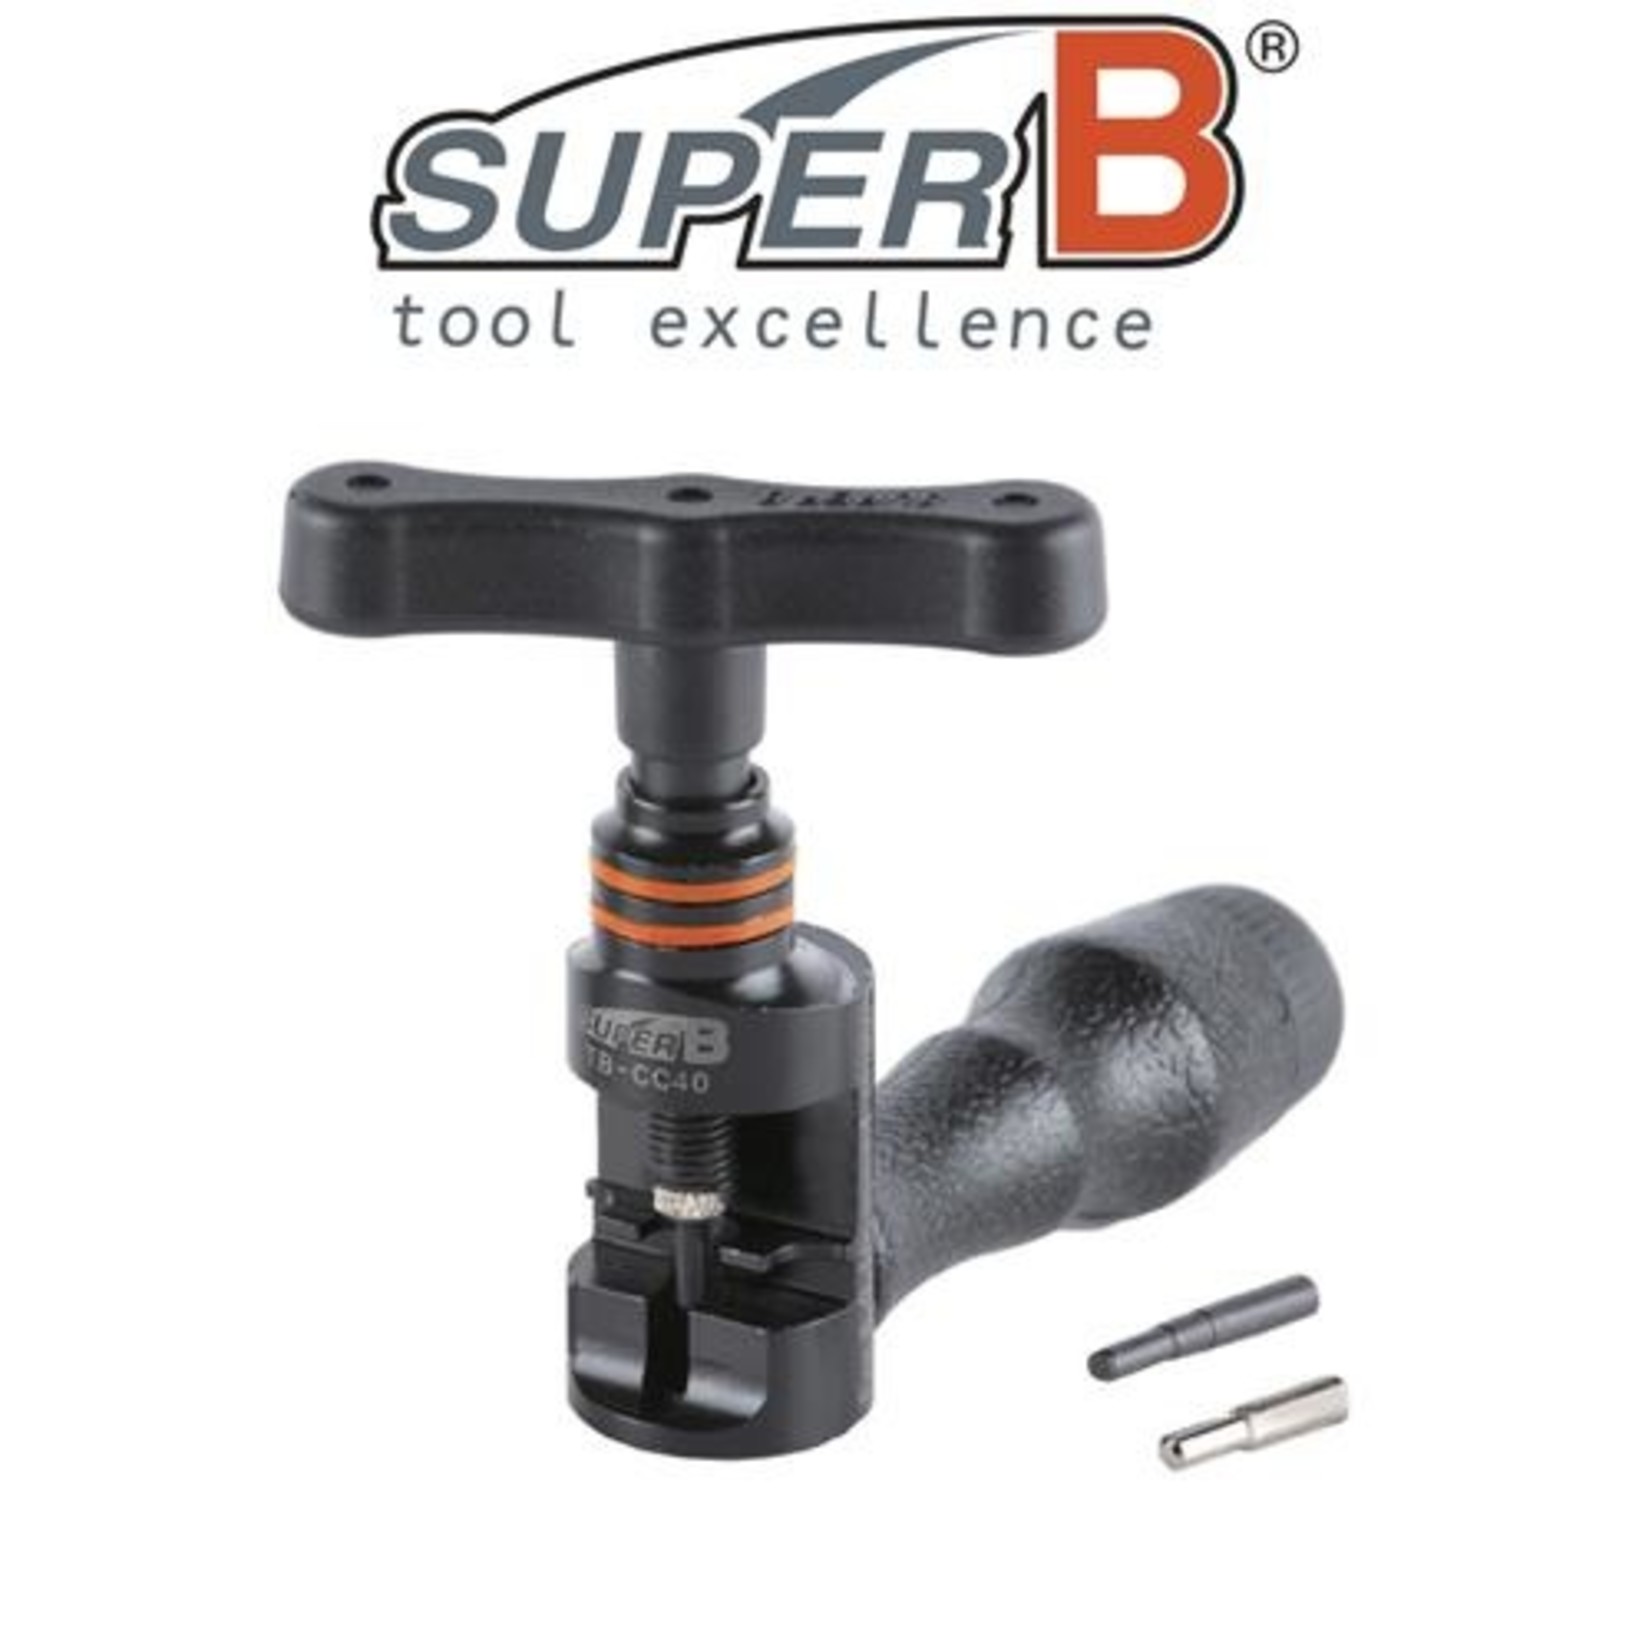 Super B SuperB Chain Rivet Extractor Tool For 1/8" to 3/16" BMX & Single Speed Chain